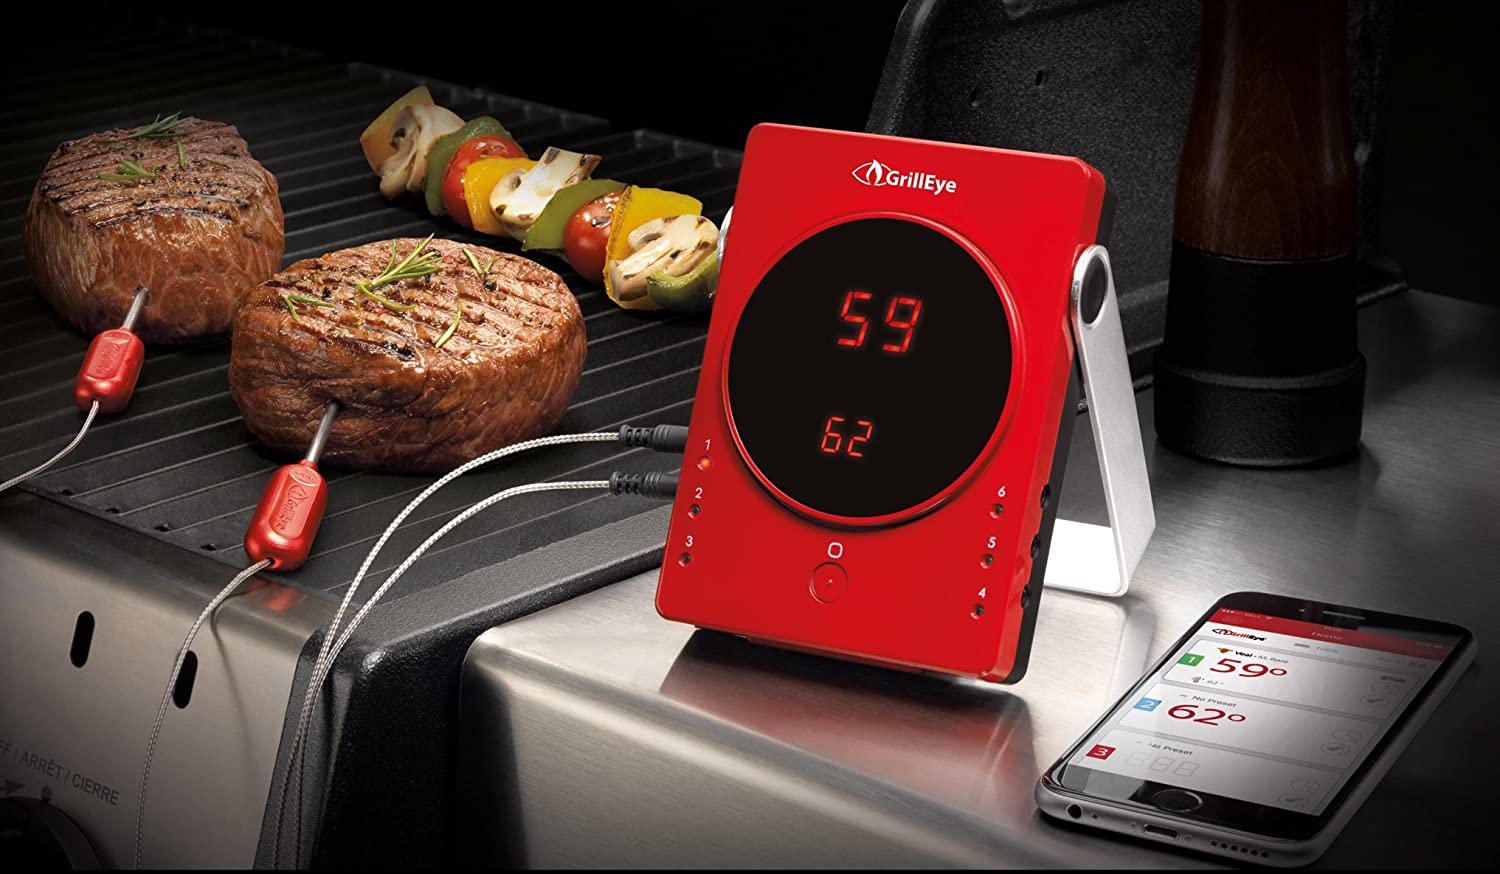 https://www.digitaltrends.com/wp-content/uploads/2021/09/thermometer-grilleye.jpg?p=1